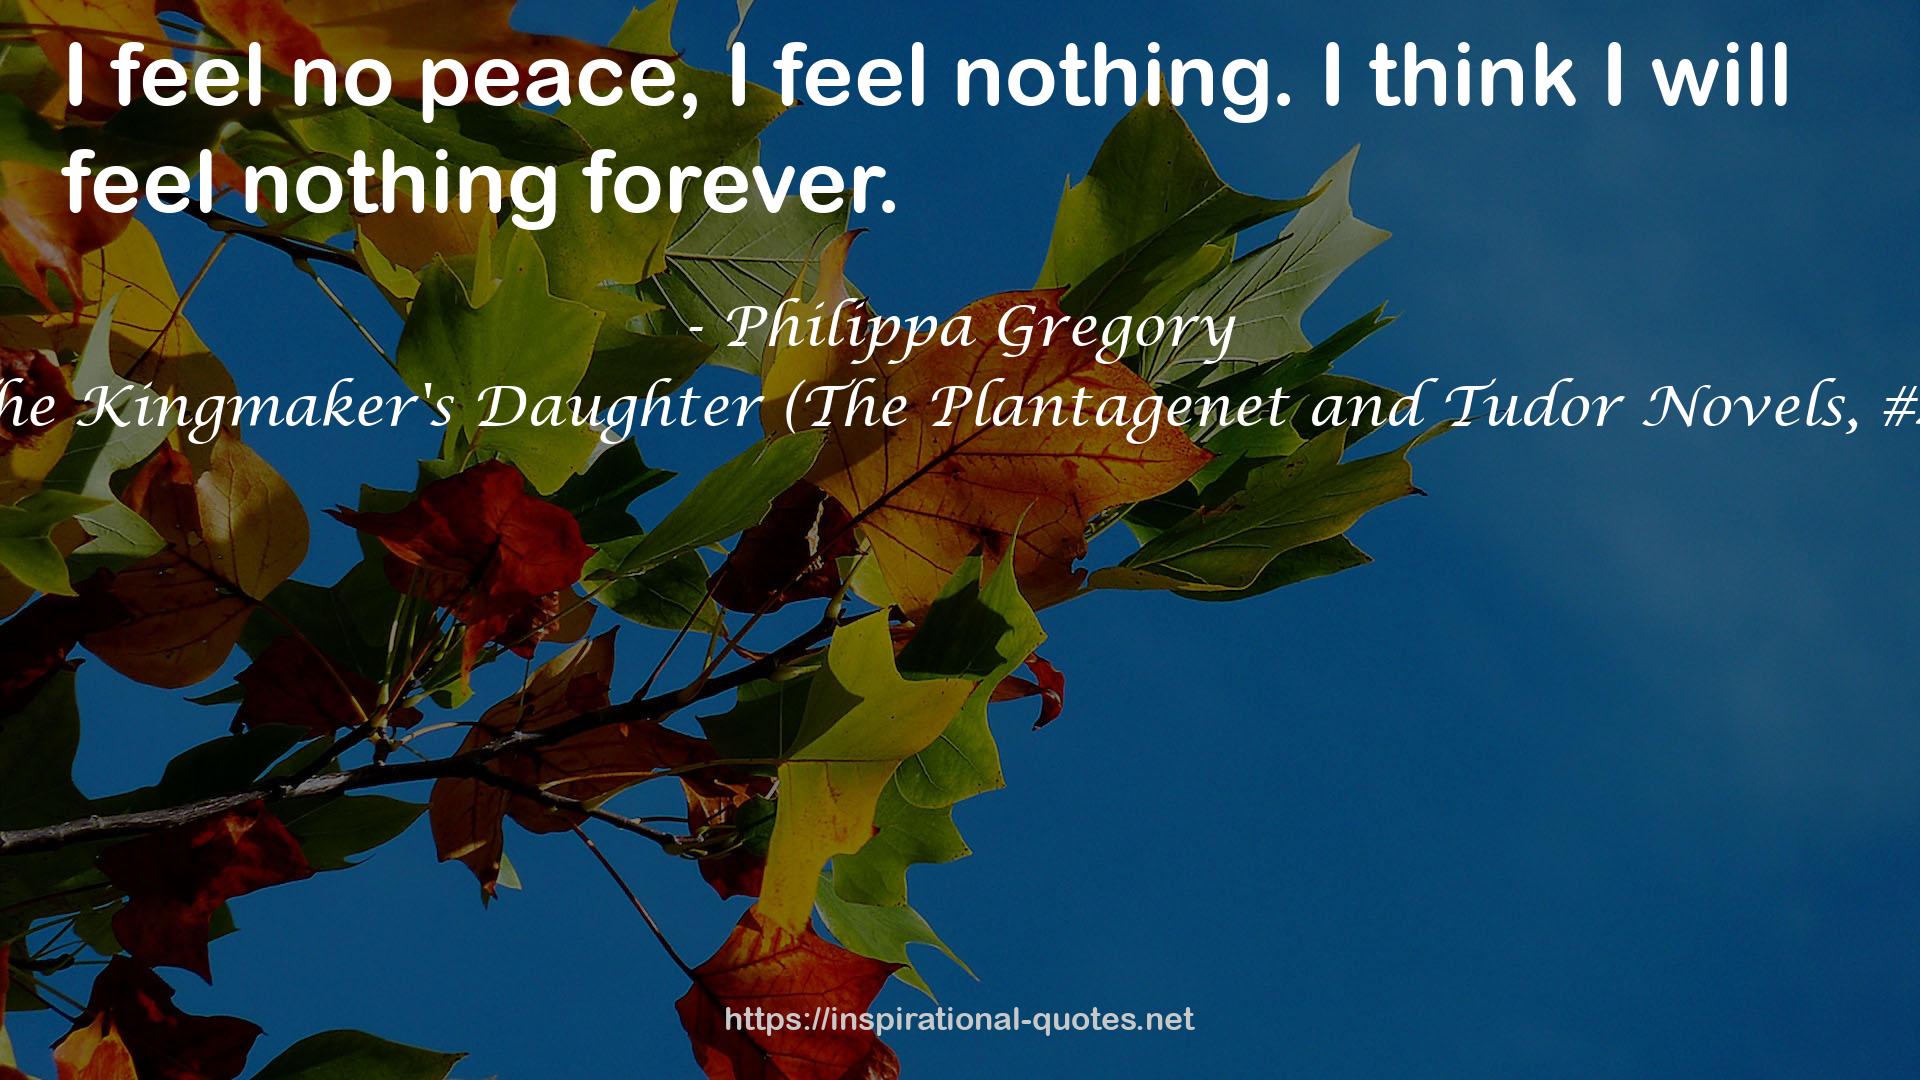 The Kingmaker's Daughter (The Plantagenet and Tudor Novels, #4) QUOTES